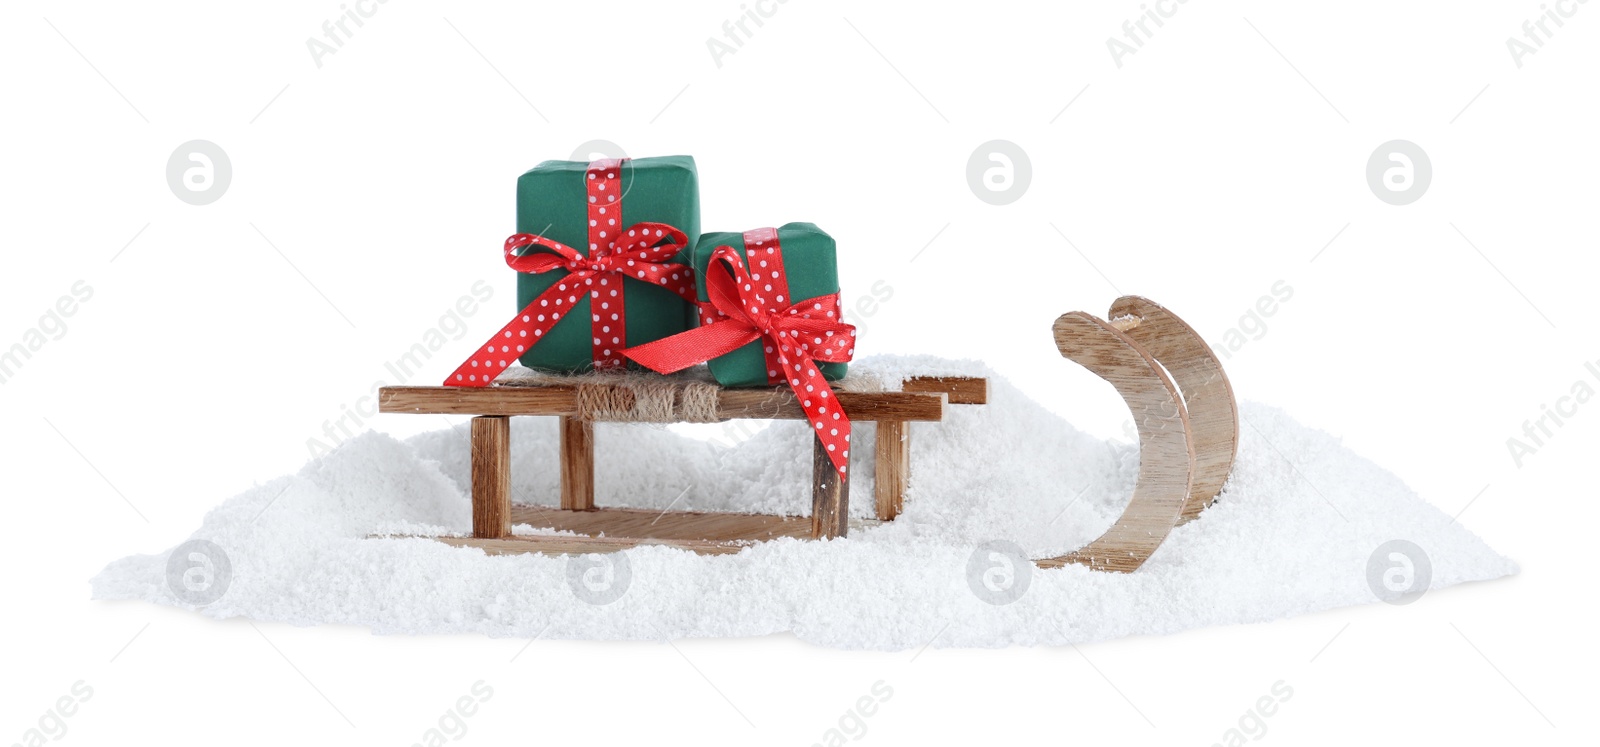 Photo of Wooden sleigh with gift boxes on white background. Christmas holiday decor